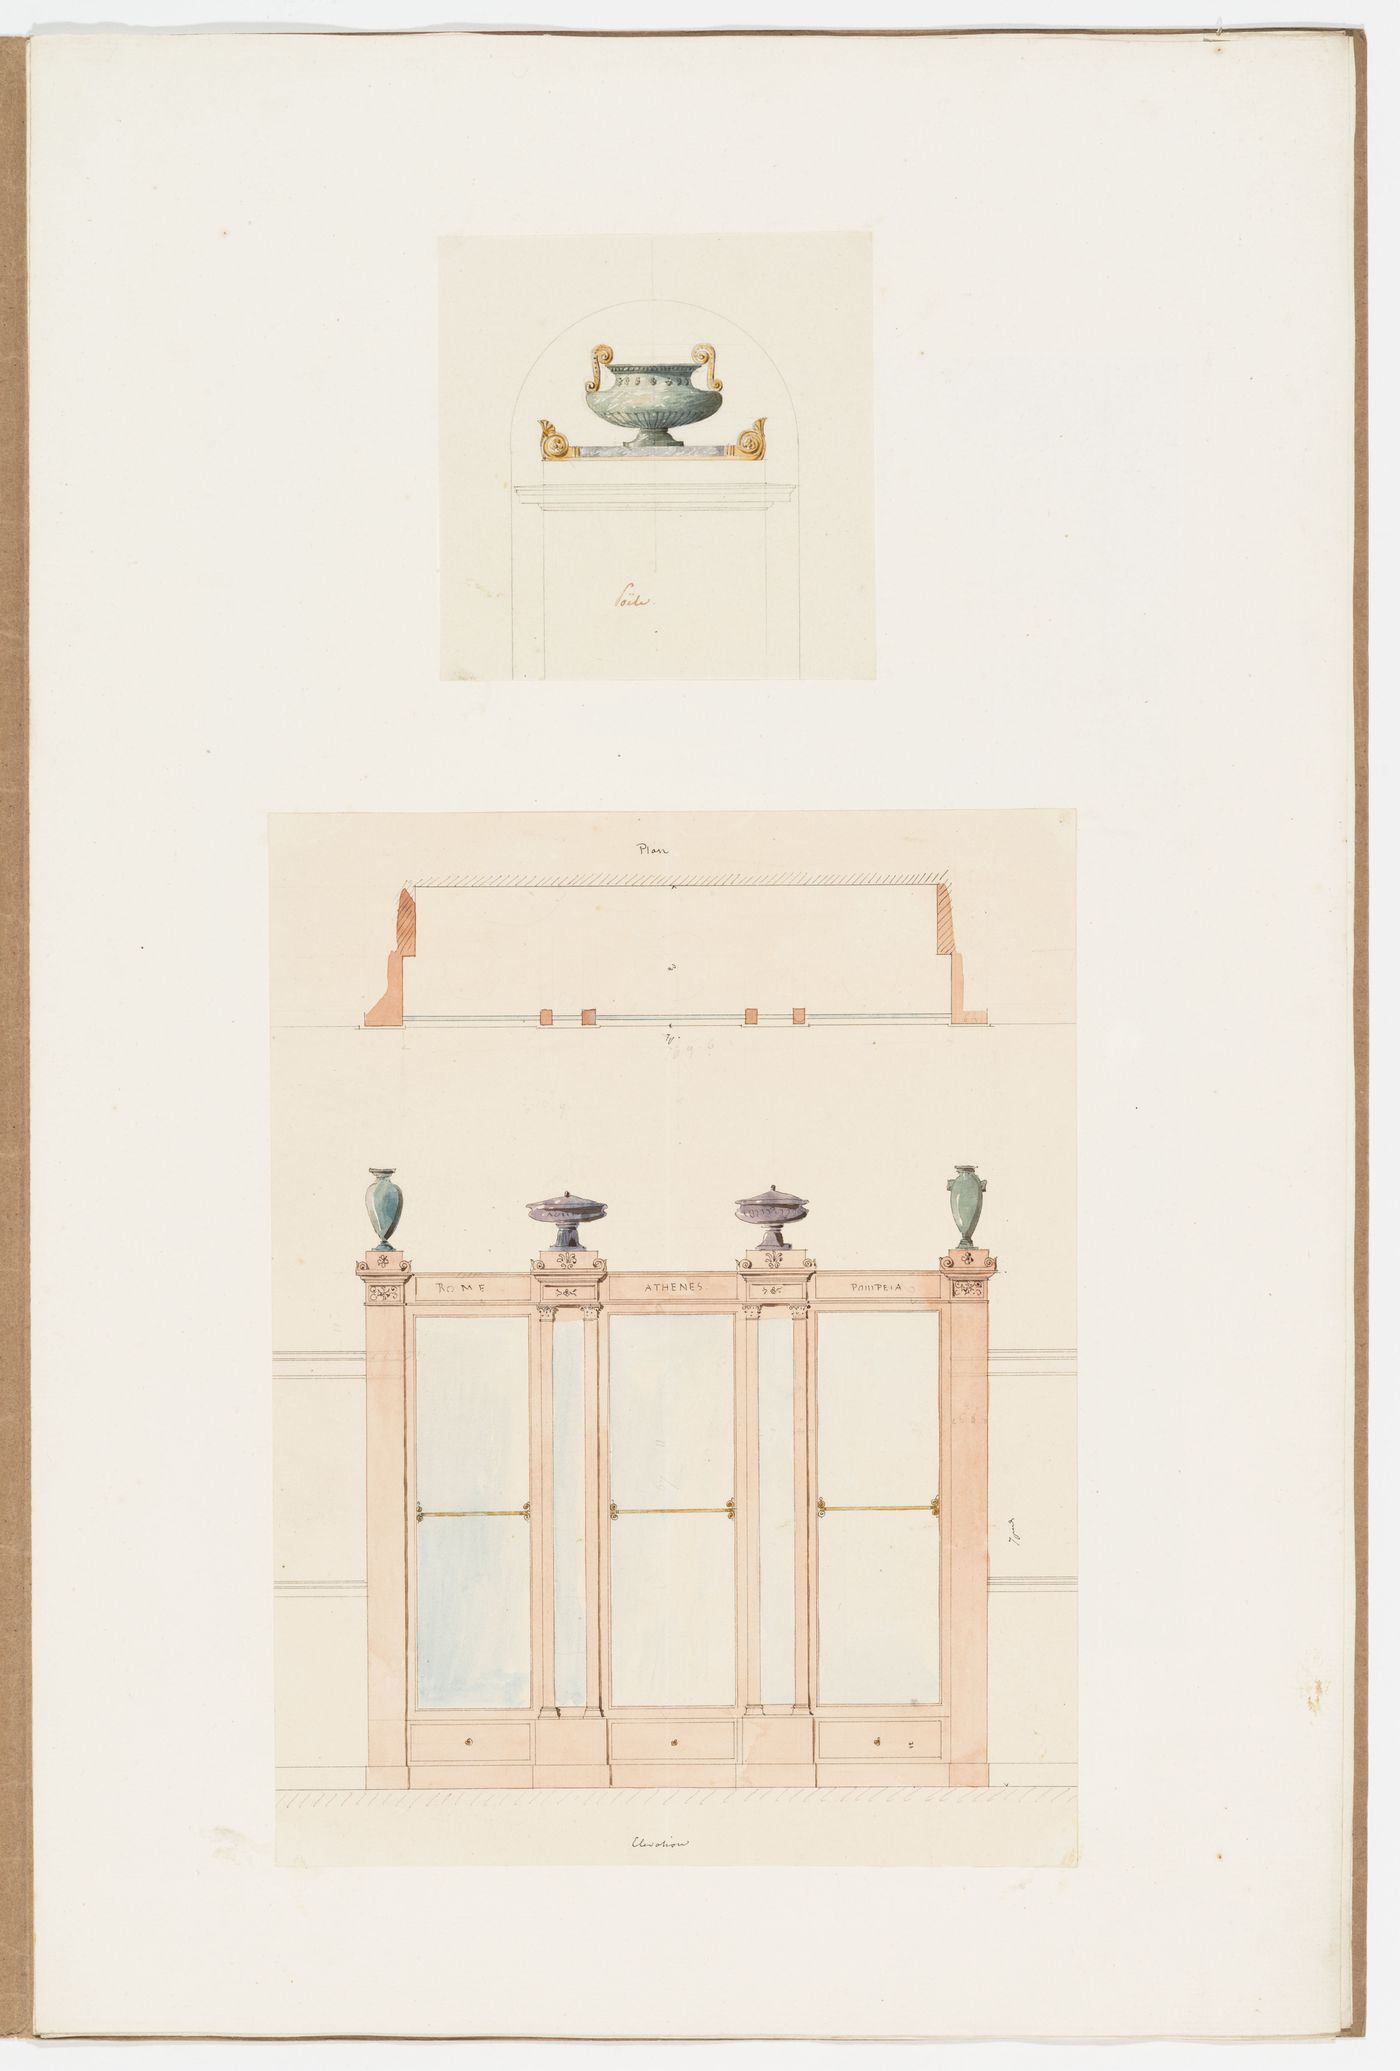 Elevation for an Empire style cabinet surmounted by vases; Elevation for a vase